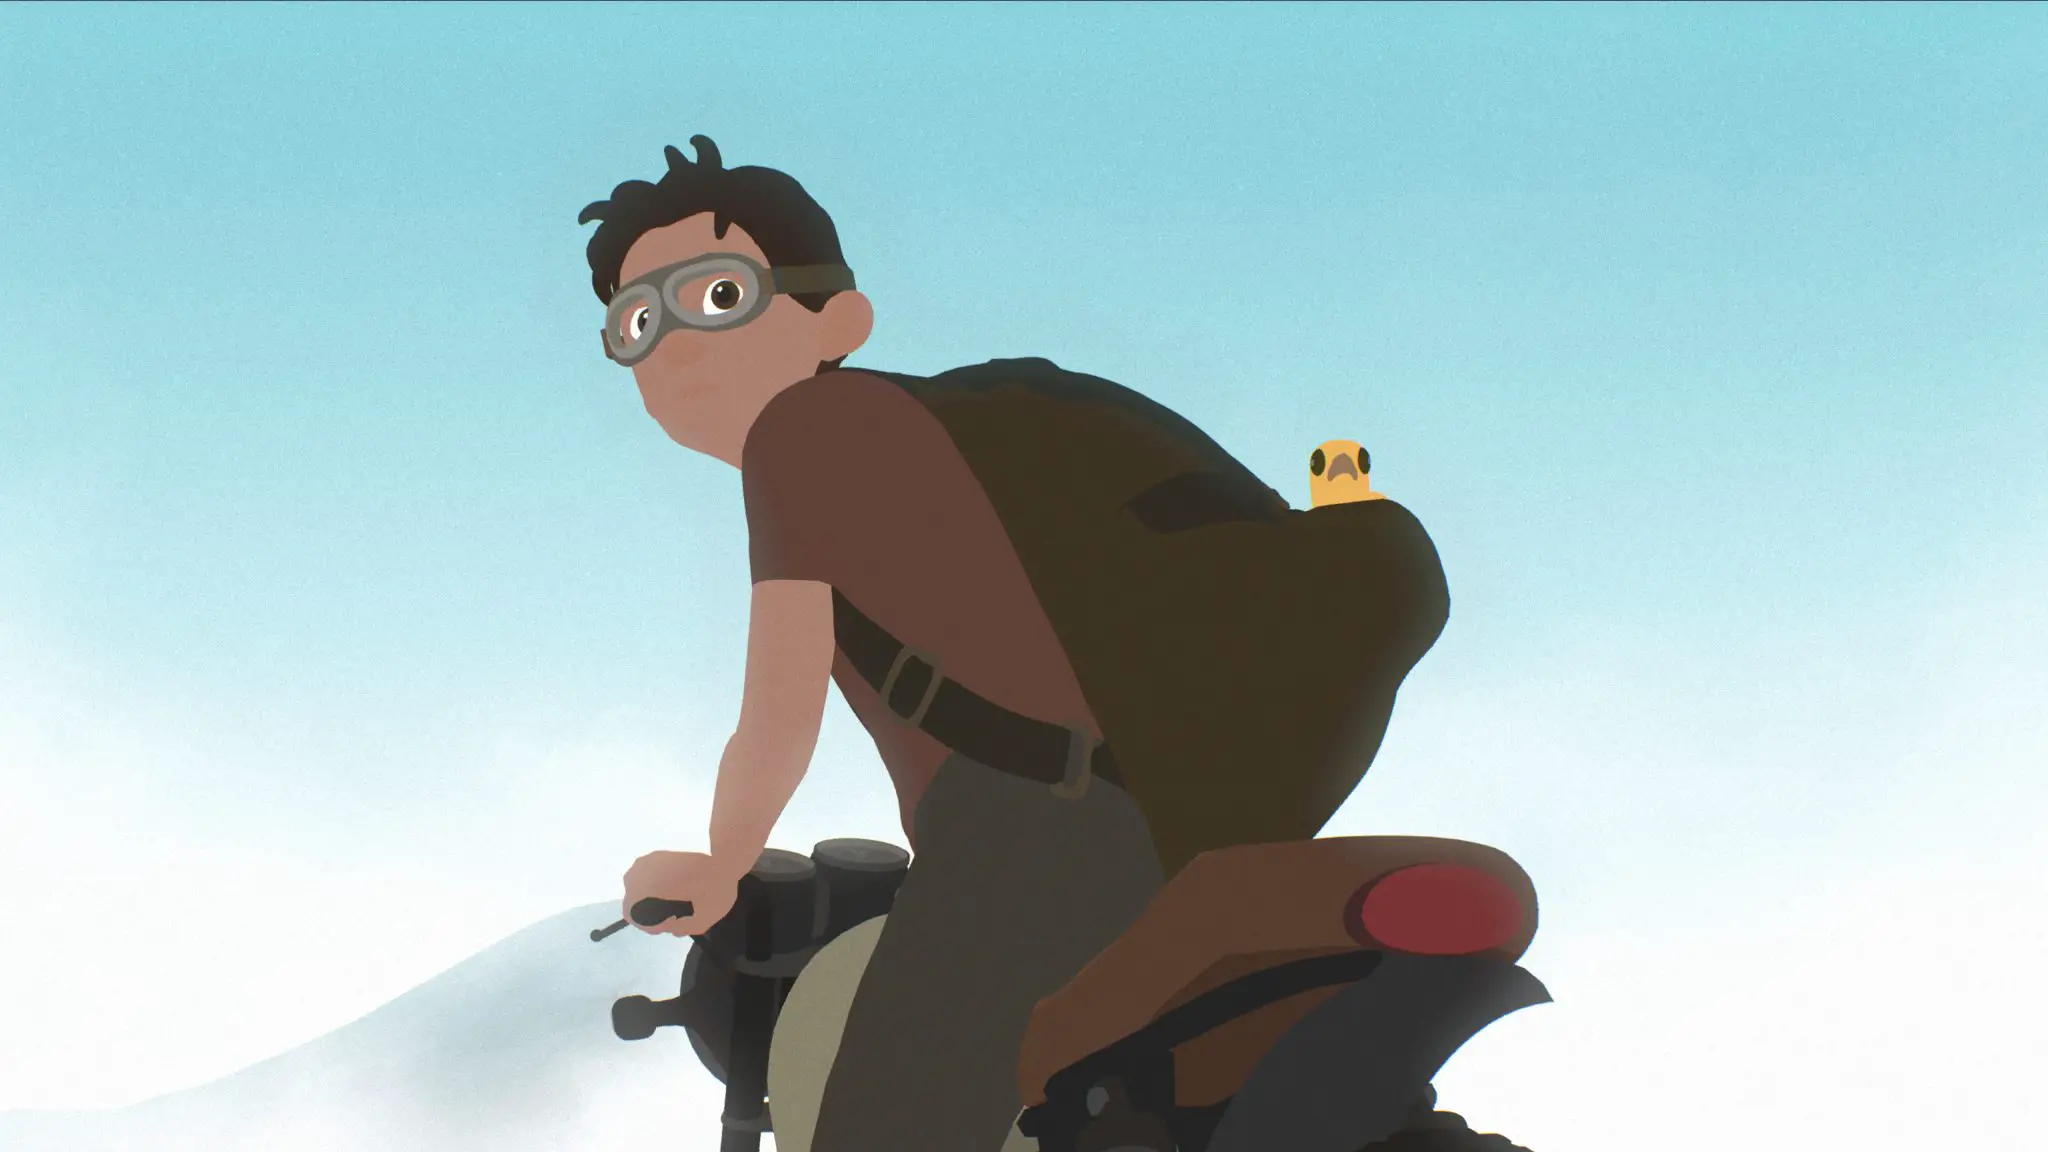 Away' is a Beautifully Animated Film About Finding Your Way Back Home »  LIVING LIFE FEARLESS